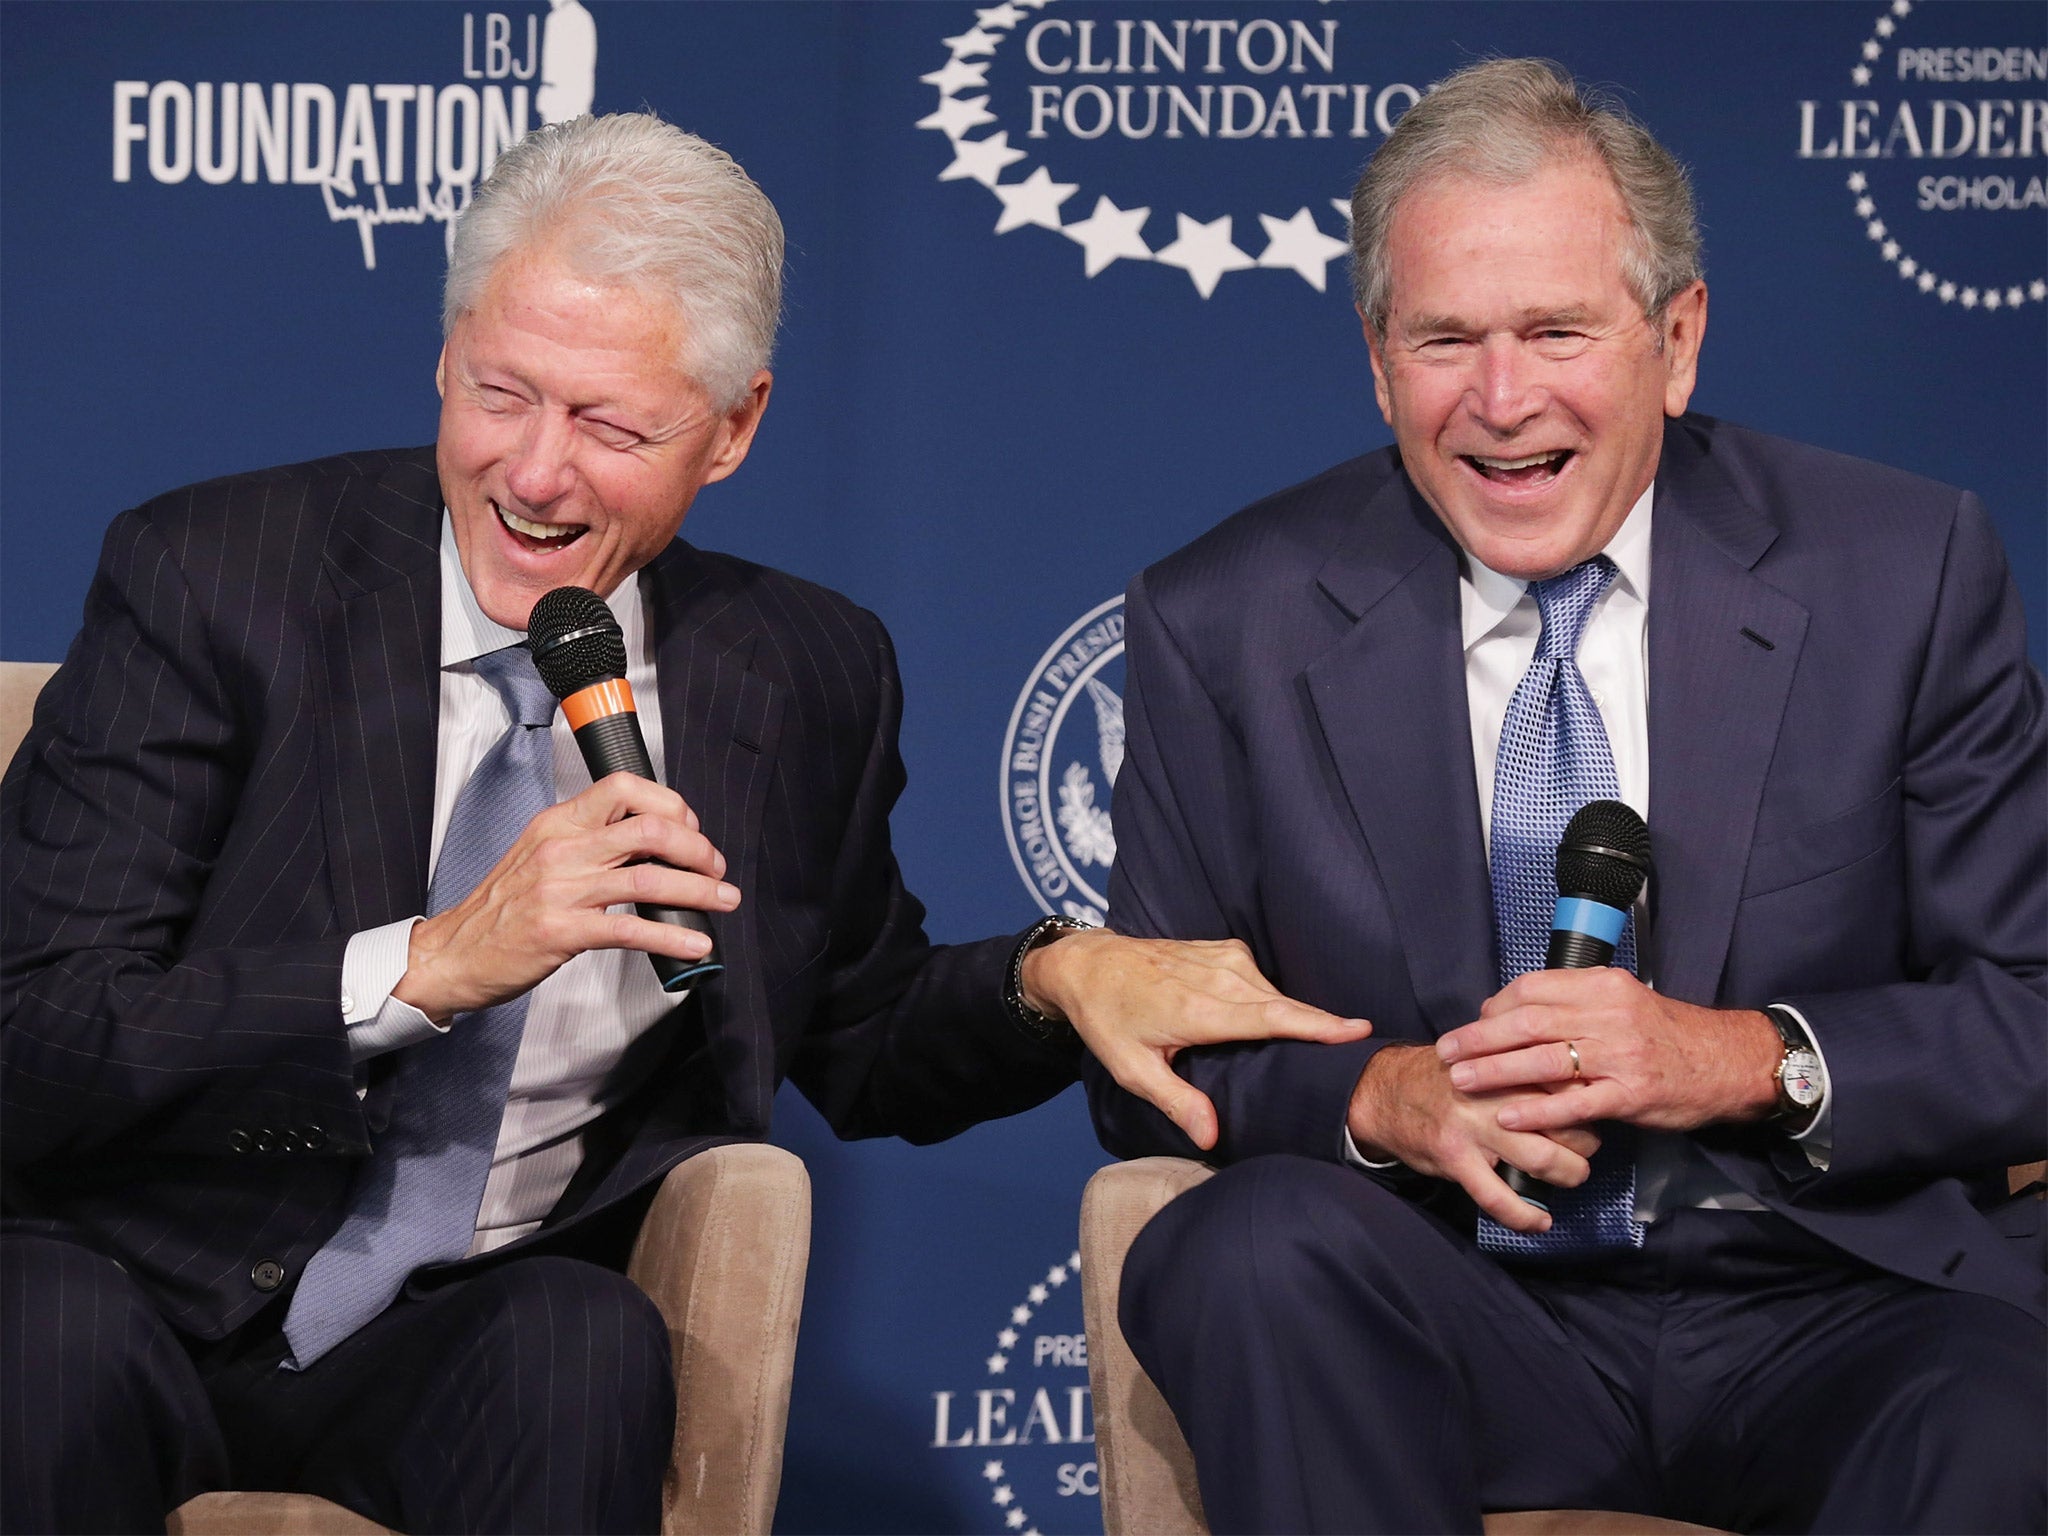 Presidents Bill Clinton and George W Bush bantered at a leadership event for young people